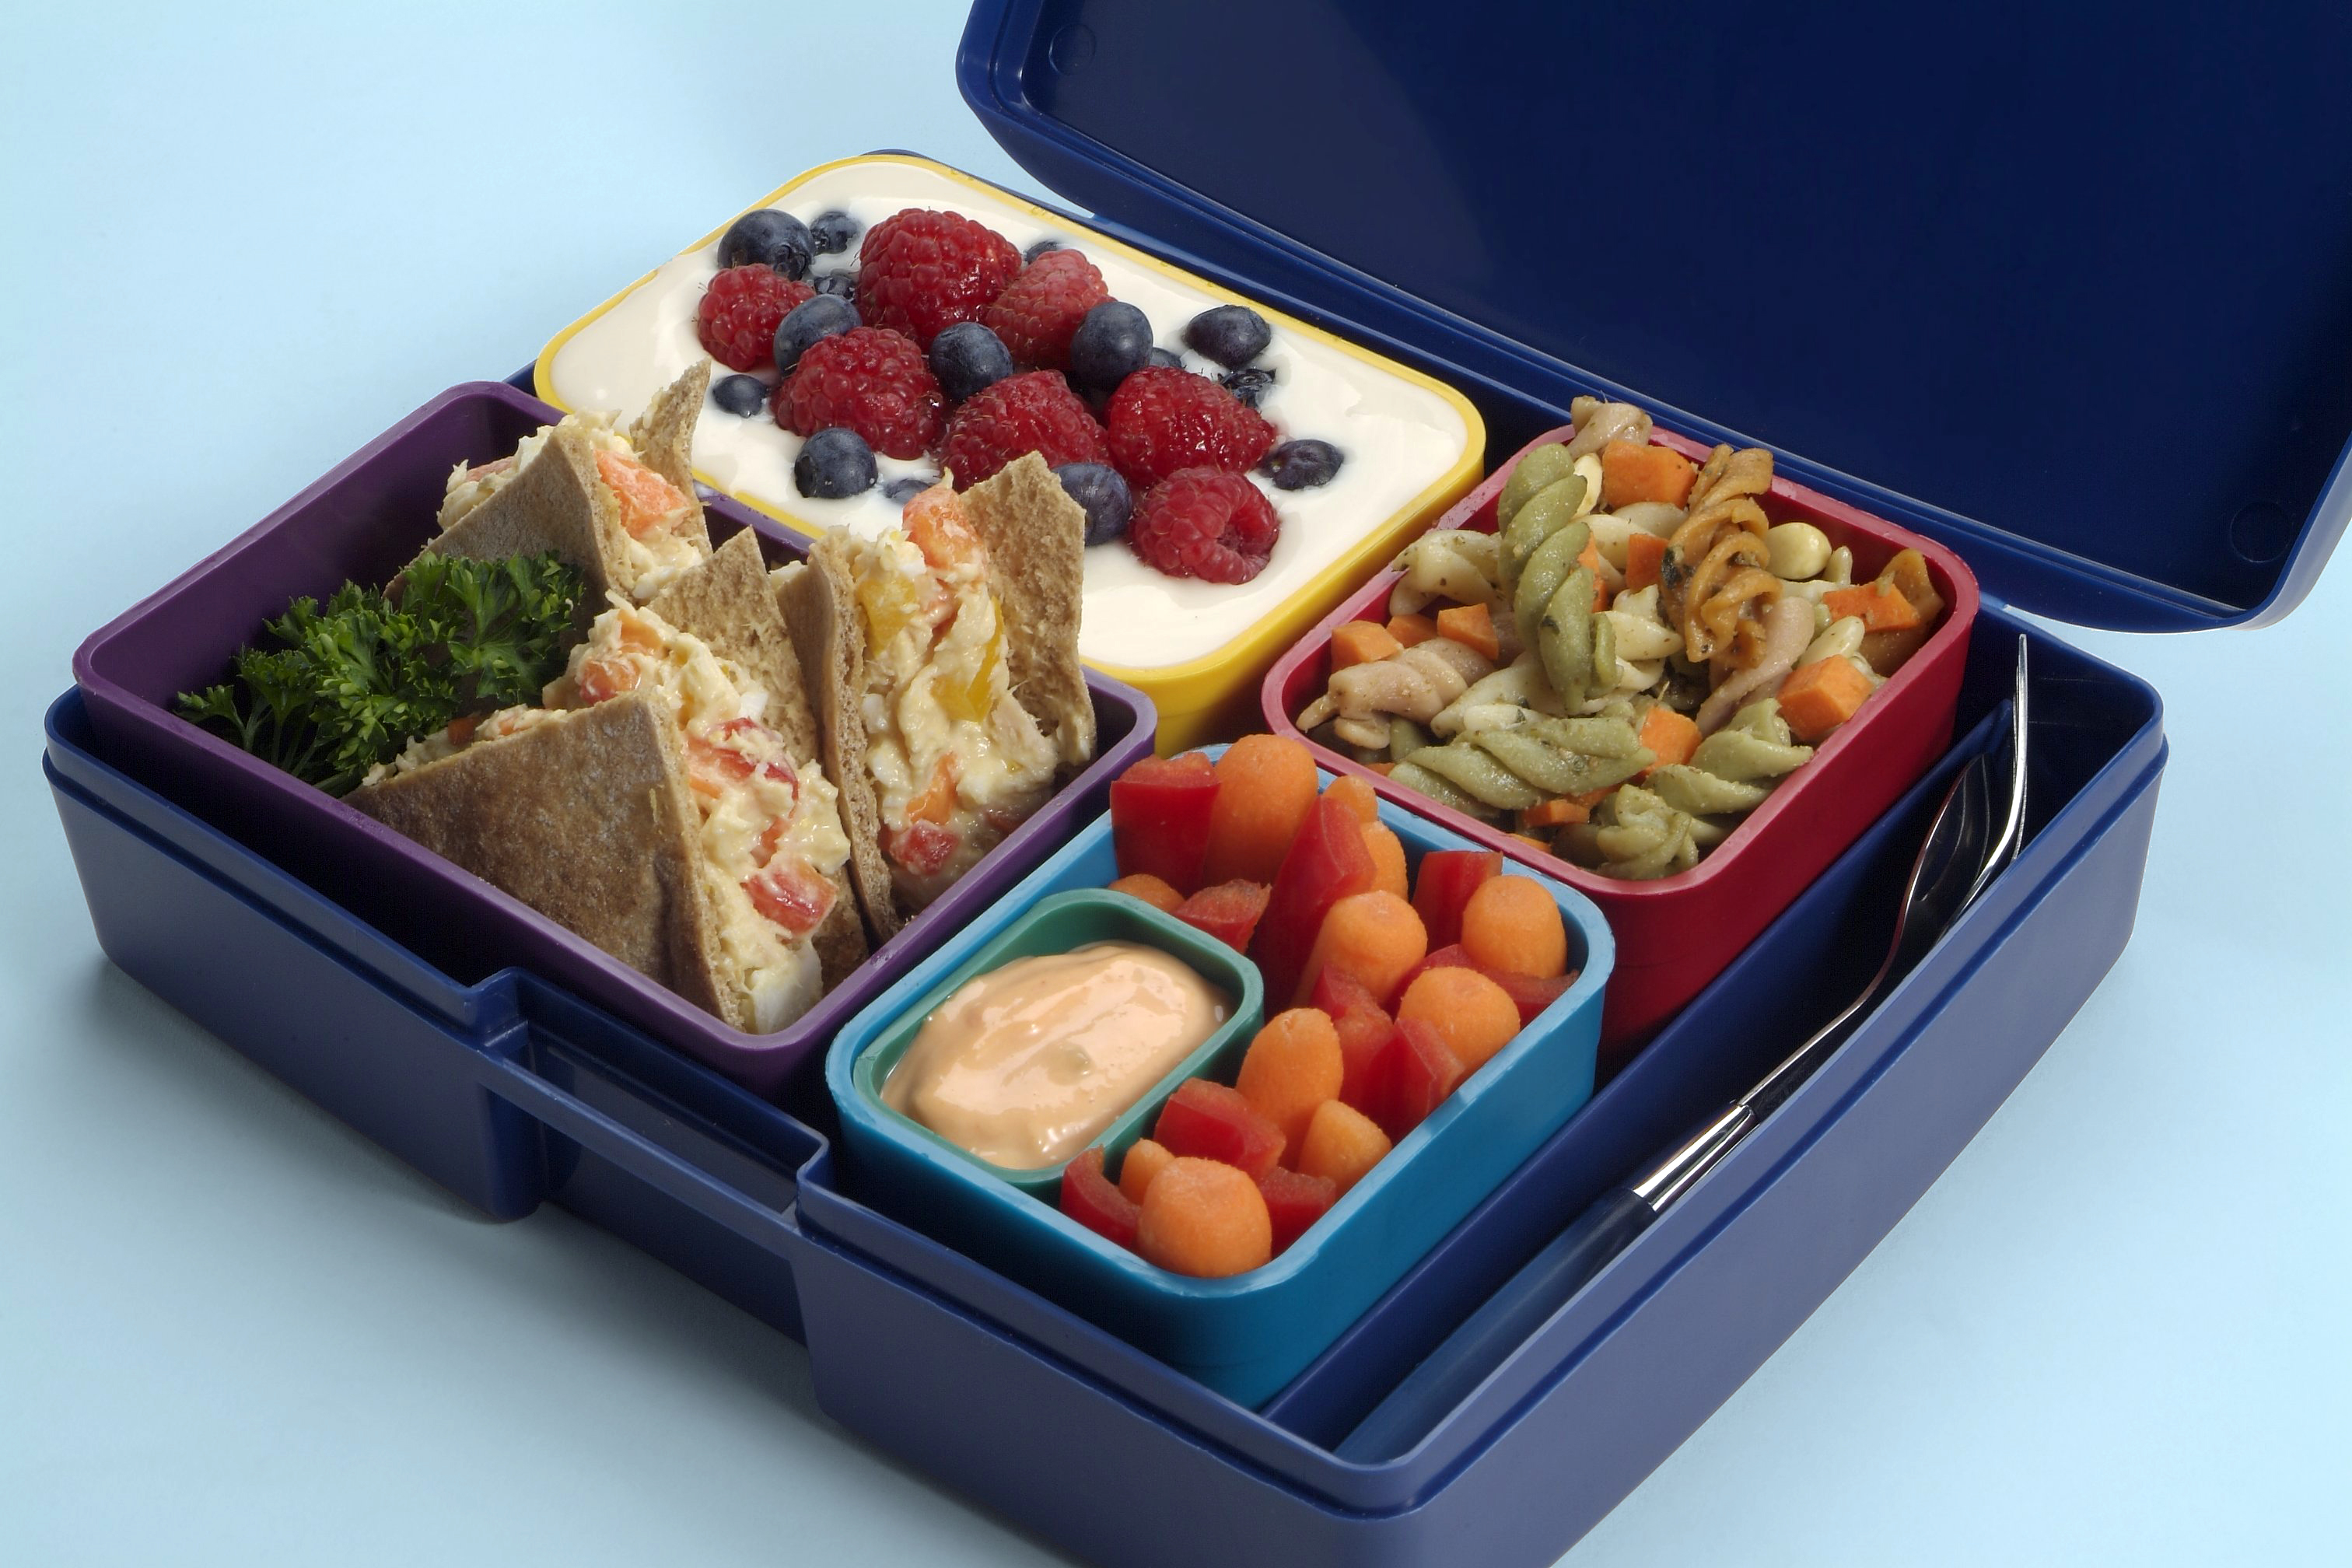 PlanetBox lunchbox for kids: Why is it so expensive?